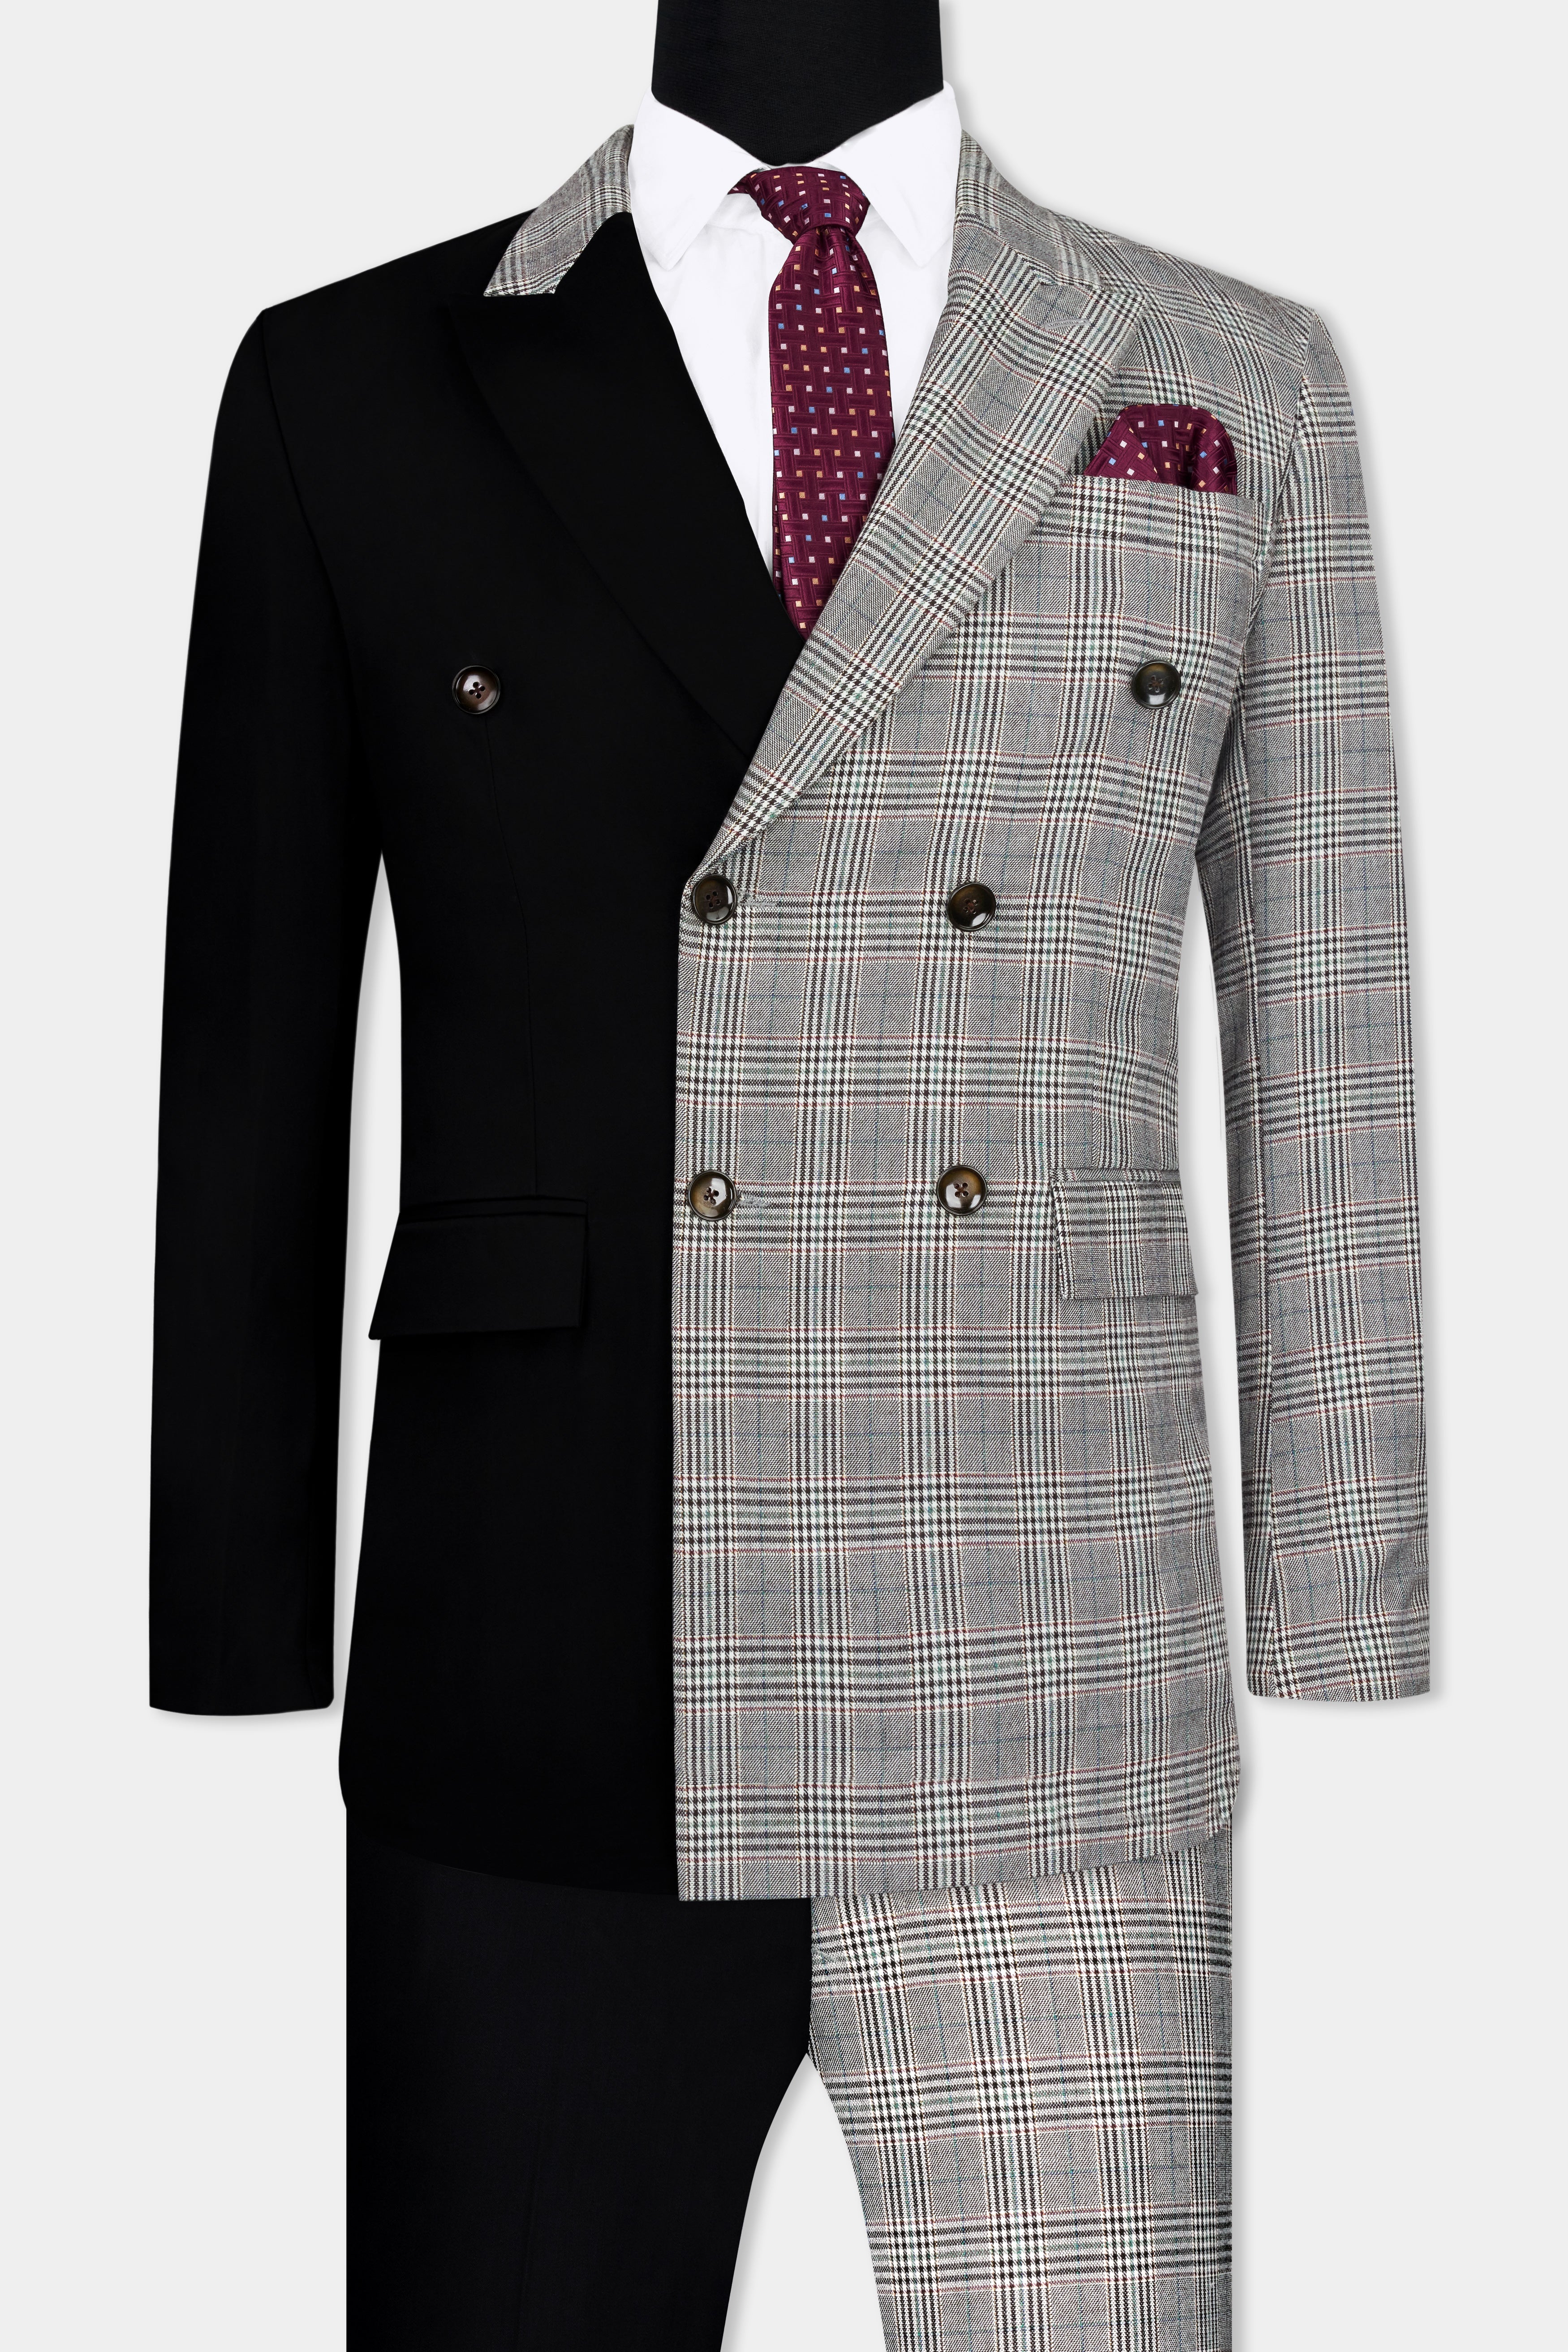 Half Black and Half Battleship Gray Checkered Wool Rich Double Breasted Designer Suit ST2748-DB-D126-36,ST2748-DB-D126-38,ST2748-DB-D126-40,ST2748-DB-D126-42,ST2748-DB-D126-44,ST2748-DB-D126-46,ST2748-DB-D126-48,ST2748-DB-D126-50,ST2748-DB-D126-52,ST2748-DB-D126-54,ST2748-DB-D126-56,ST2748-DB-D126-58,ST2748-DB-D126-60